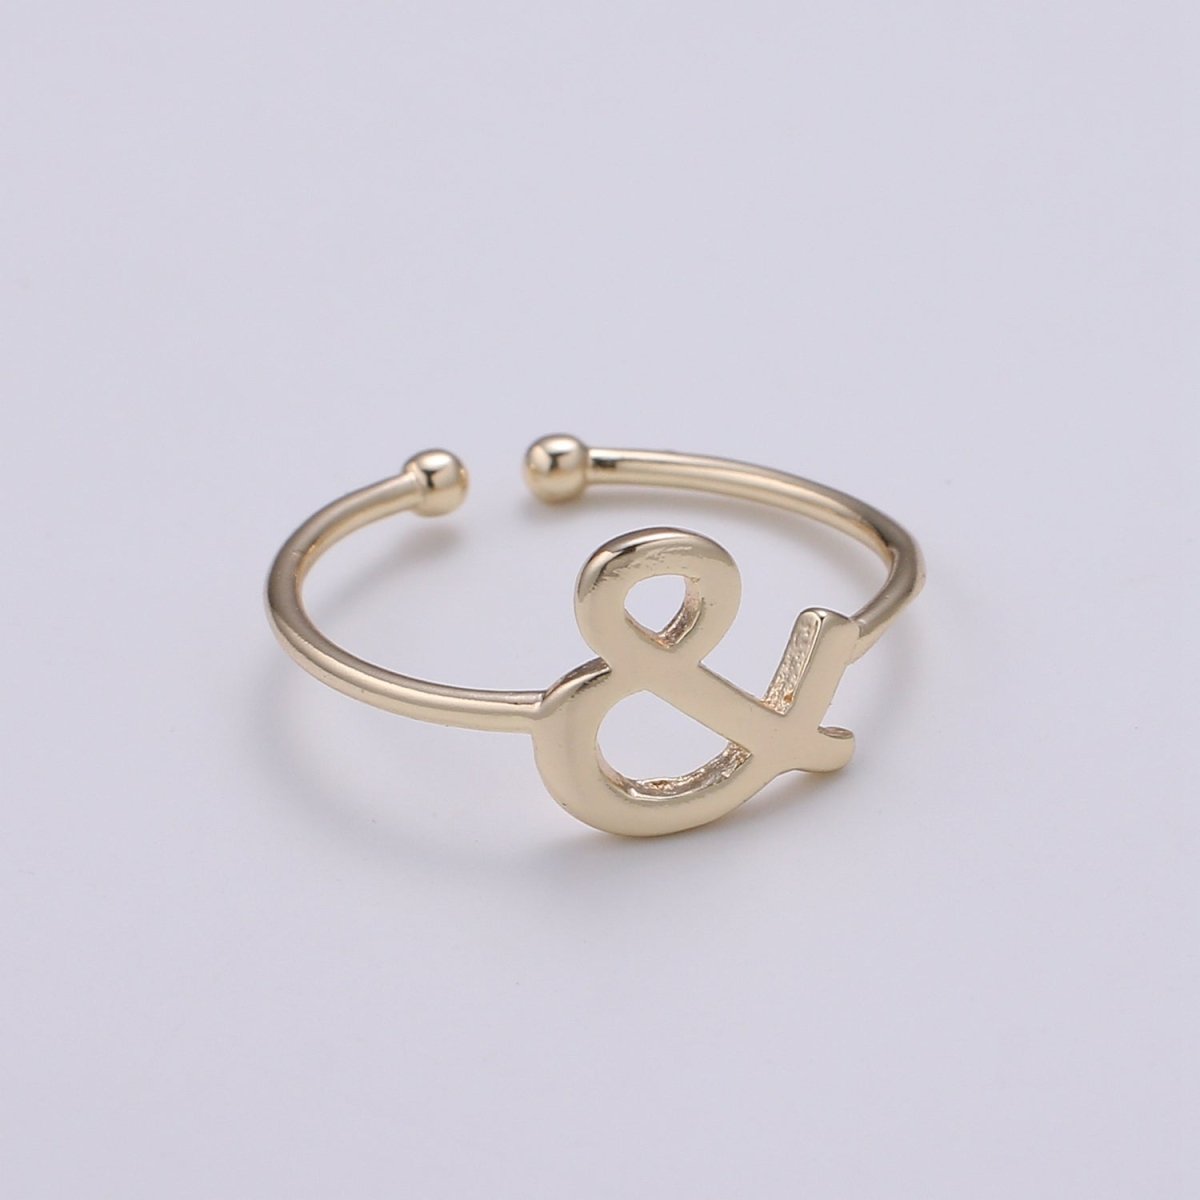 1pc Ampersand 18k Gold Ring, "And" symbol Adjustable Gold Curb Ring, Simple Ring, "Et" Ring- 254 - DLUXCA